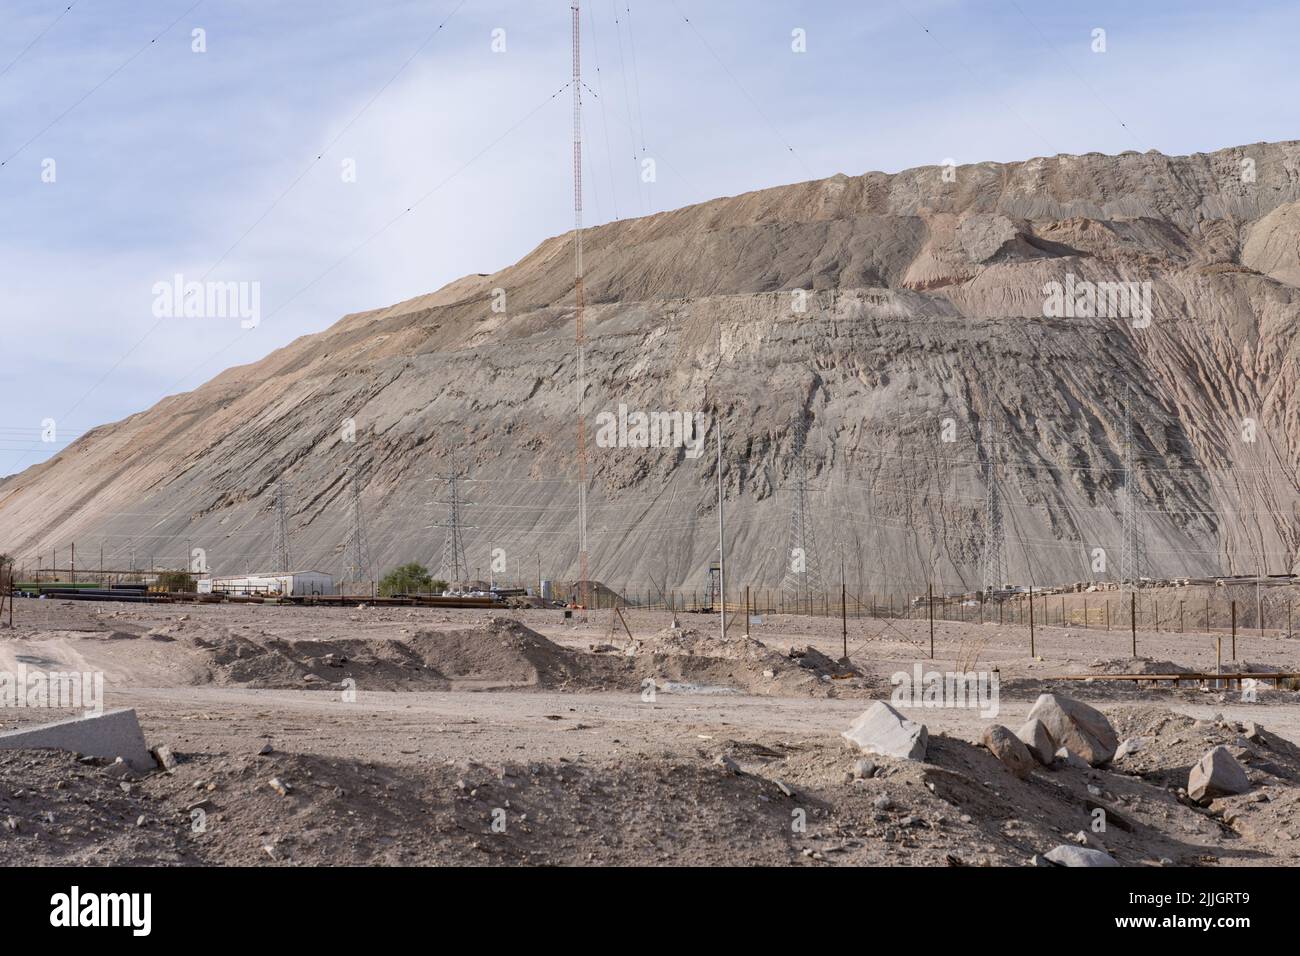 Enormous mine tailings at the huge Codelco open pit copper mine in the Atacama Desert at Chuquicamata, Chile. Stock Photo